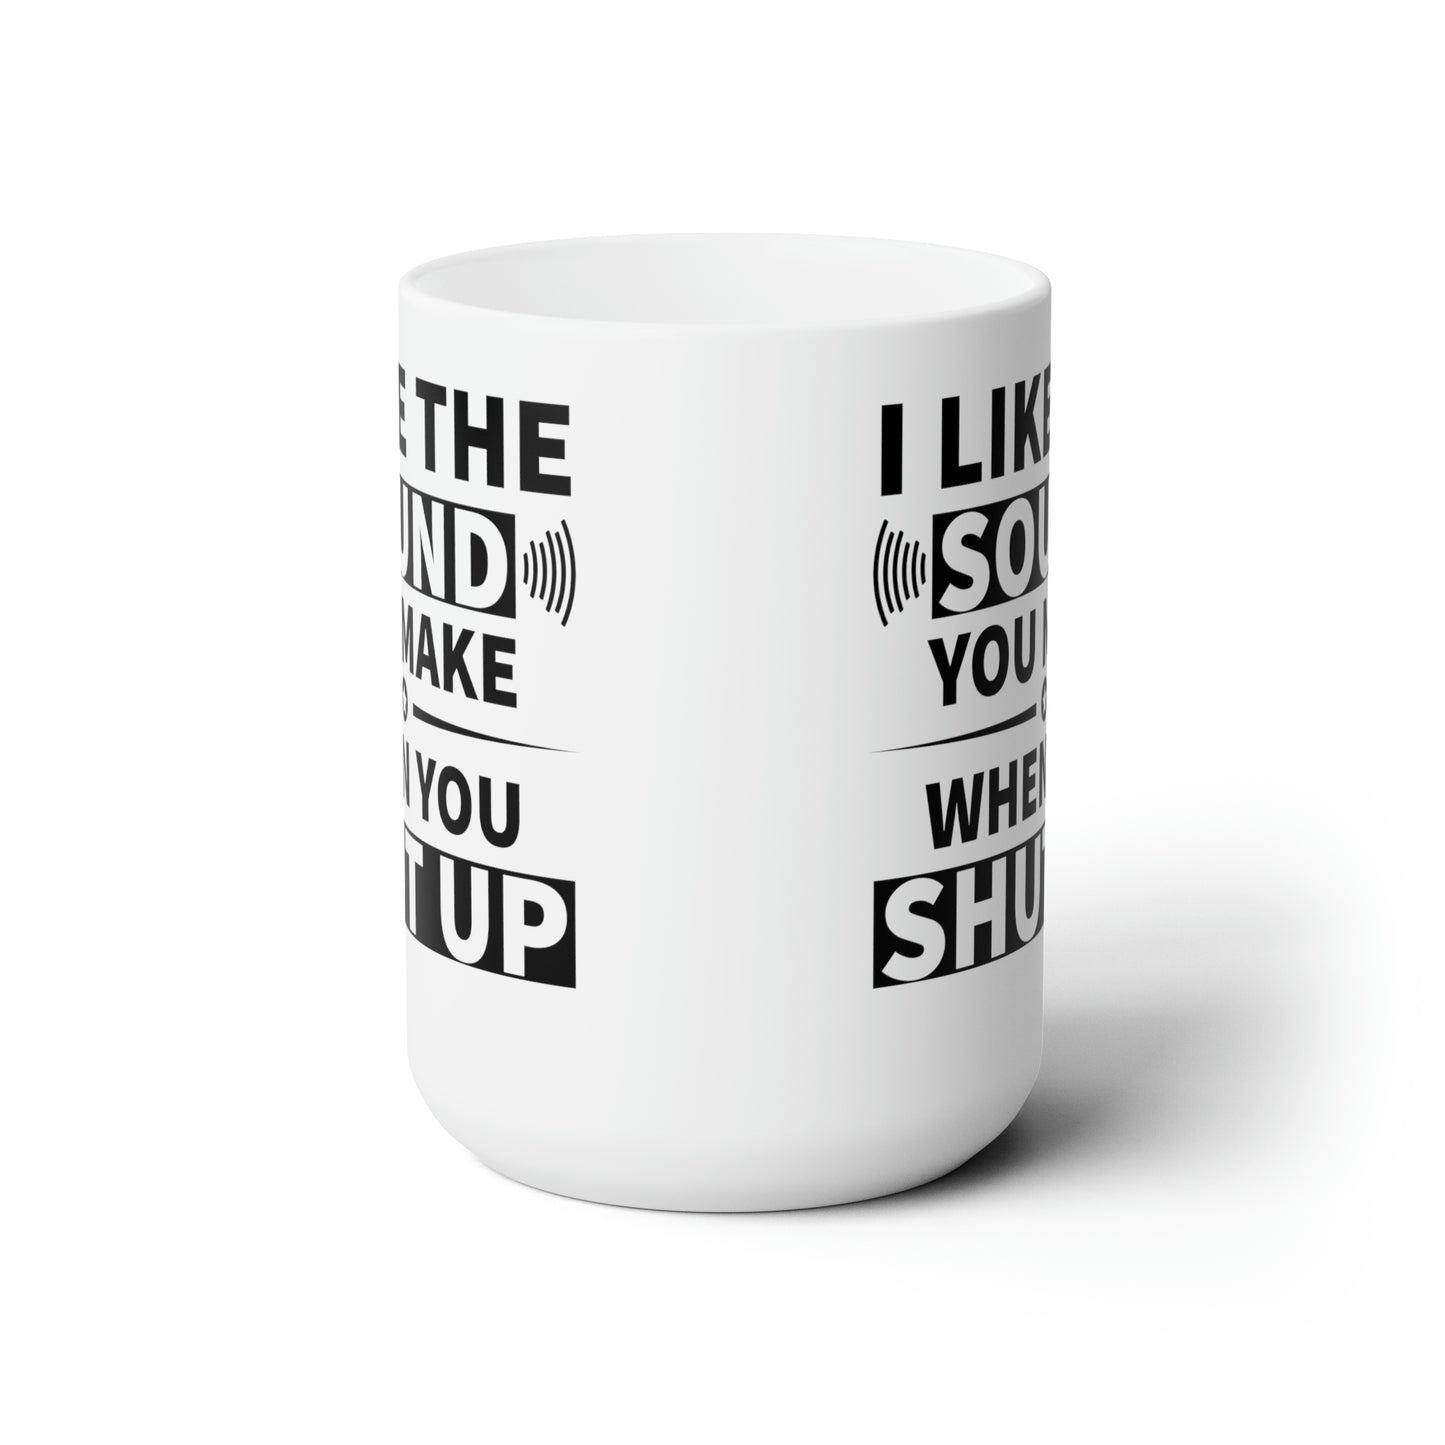 Sarcastic Humor Coffee Mug For Shut Up Hot Tea Cup For Funny Gift Idea